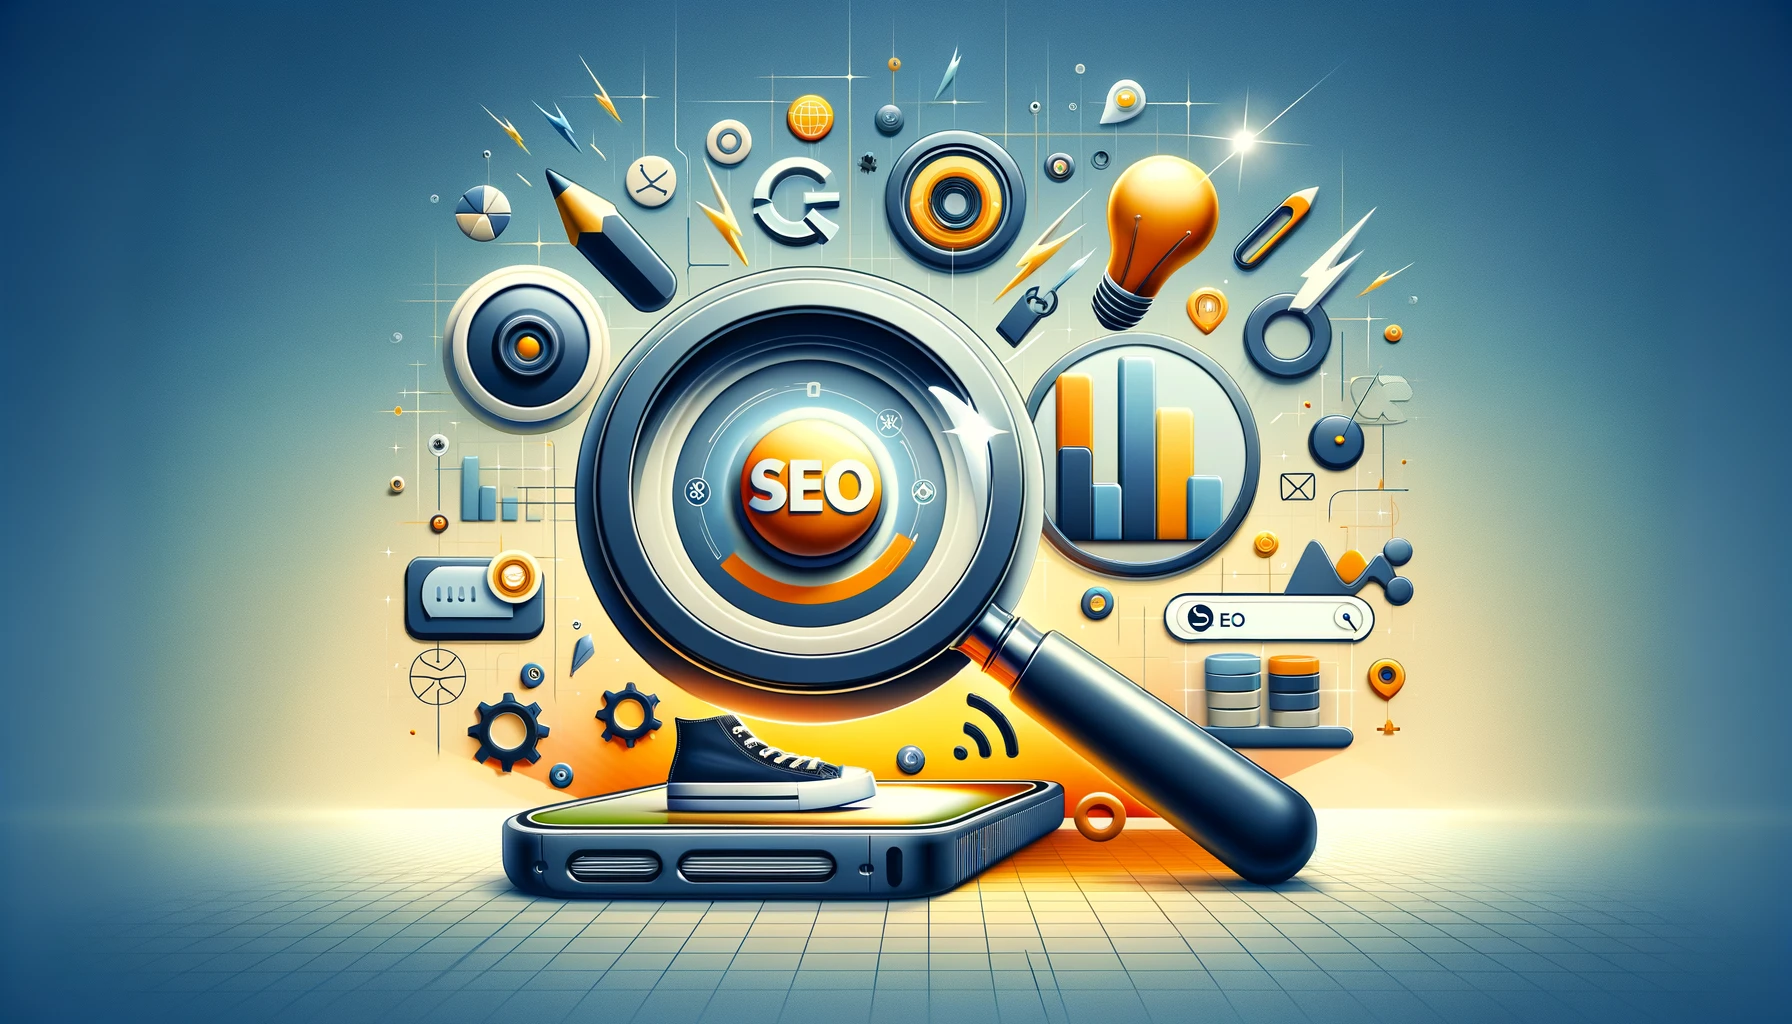 Abstract depiction of product page optimization featuring a magnifying glass highlighting a high-quality product image, surrounded by SEO and user experience icons.